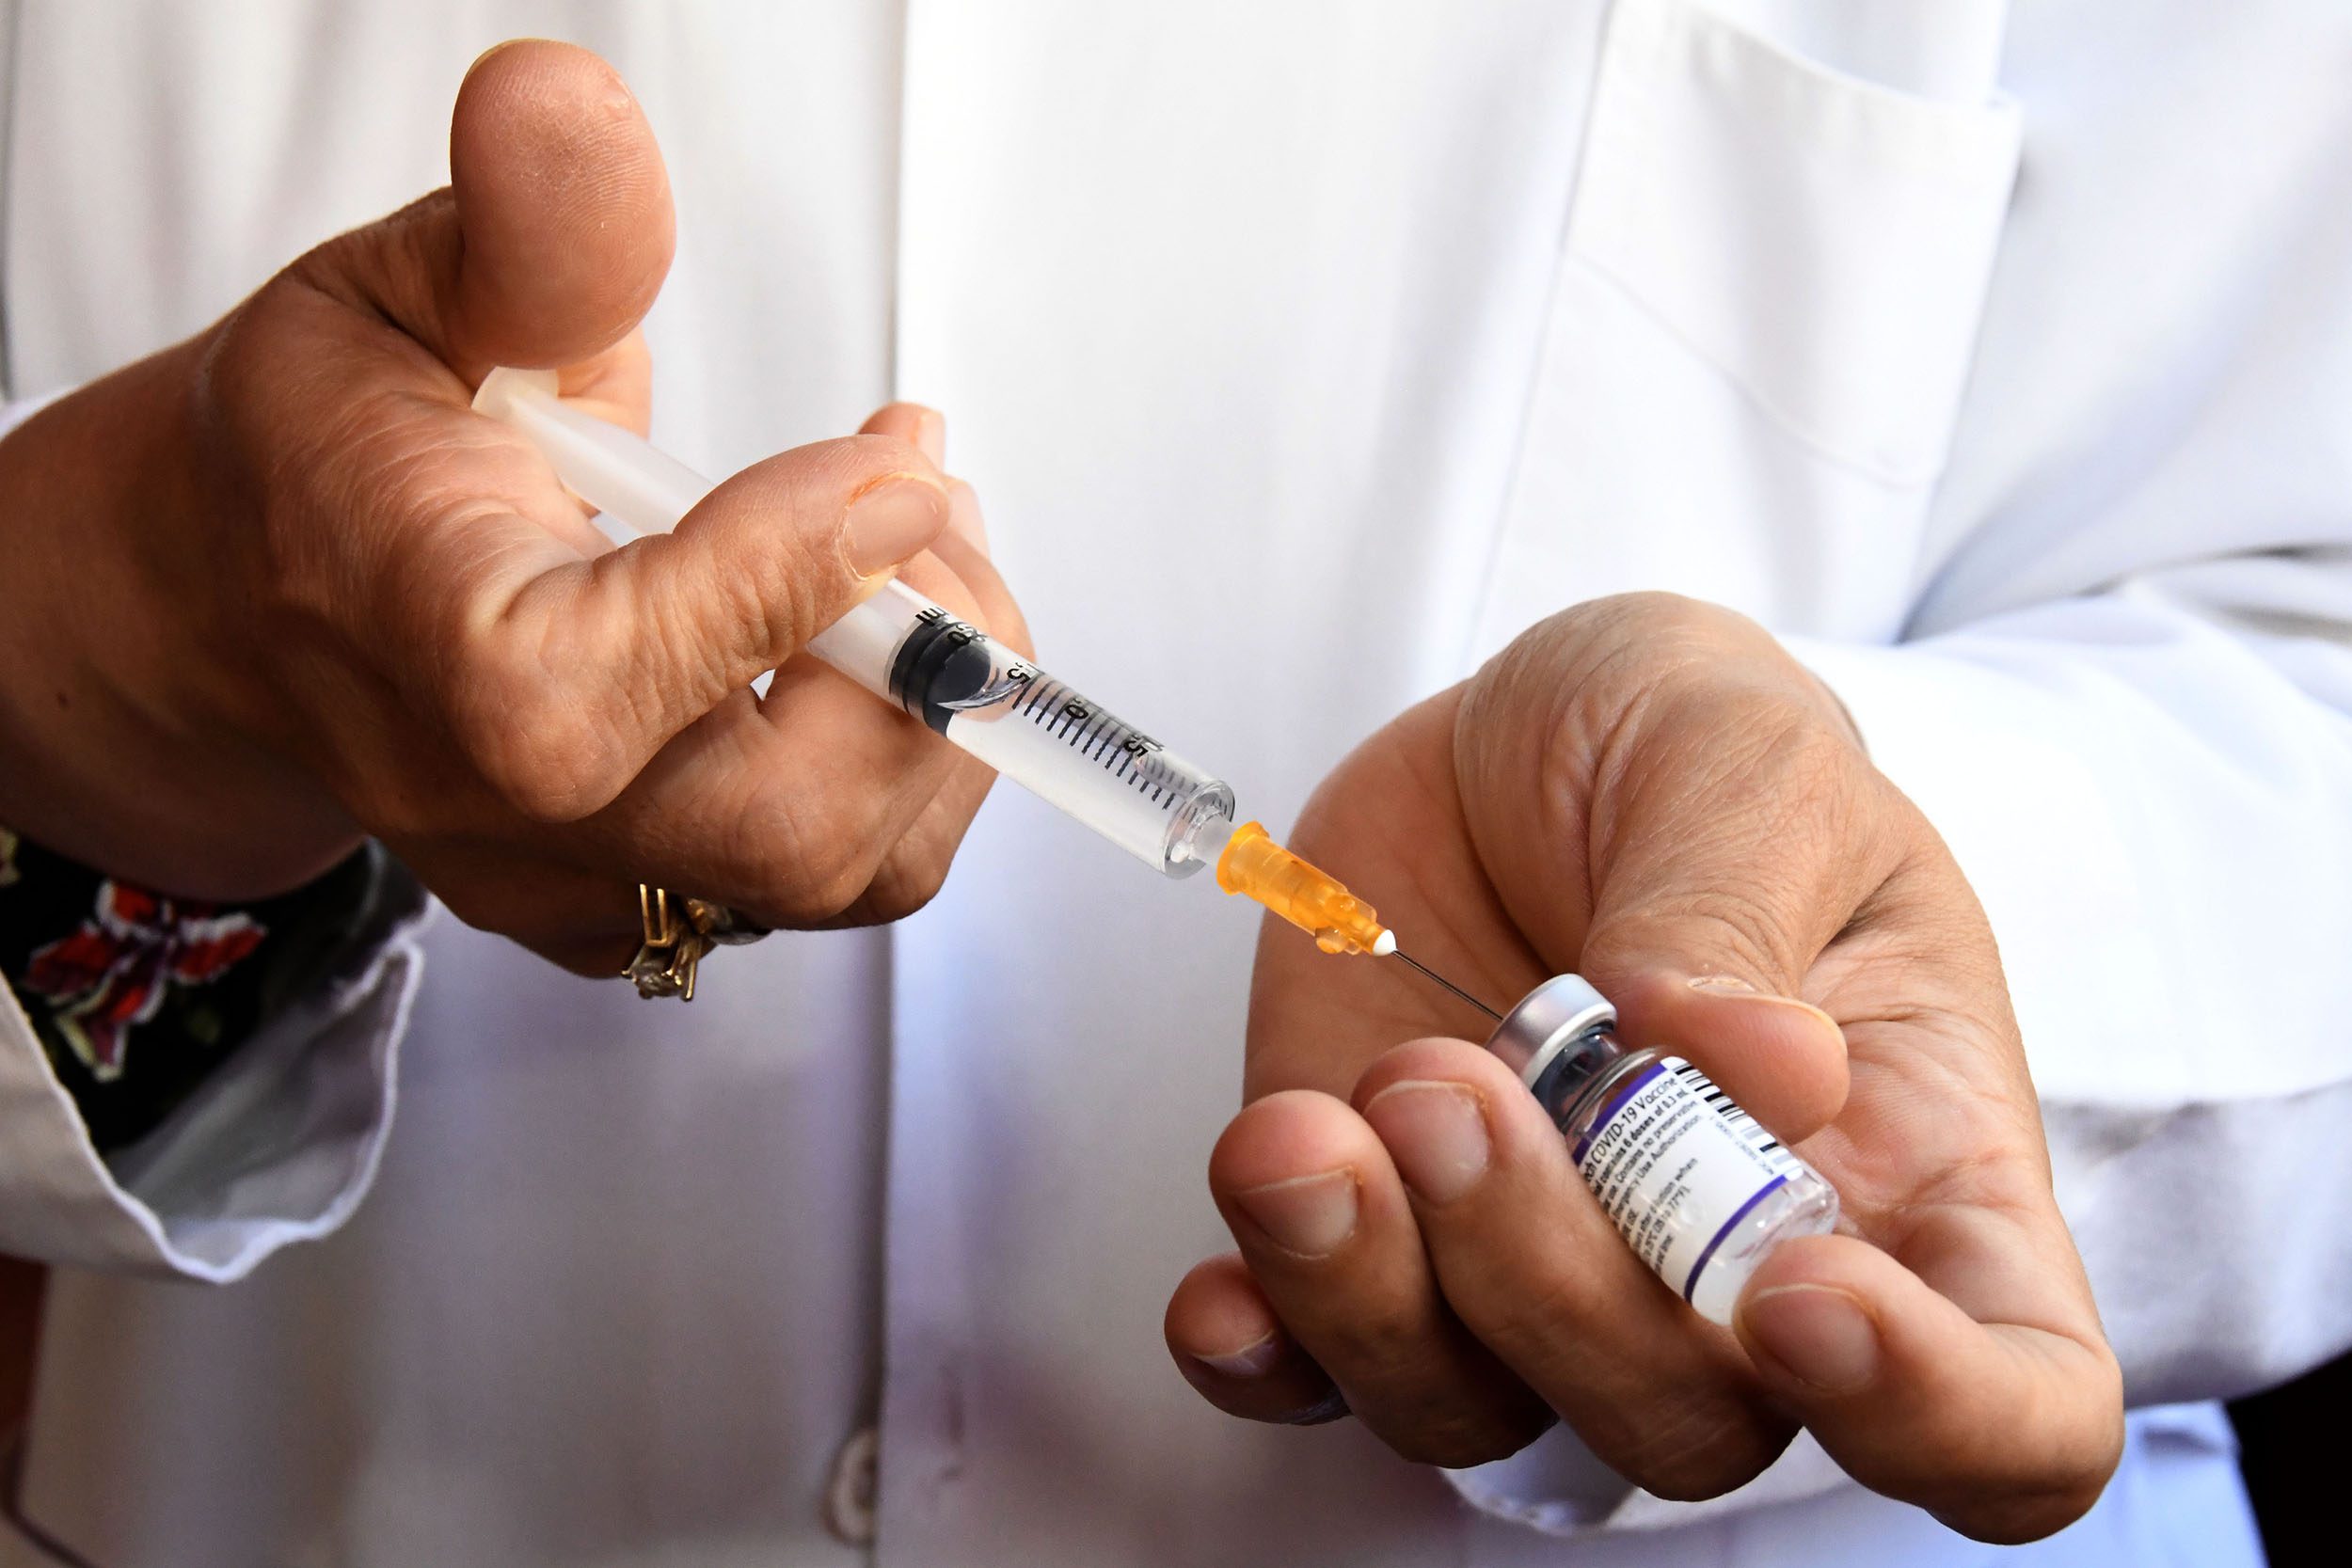 Turkey has administered over 129.3 million doses of COVID-19 vaccines